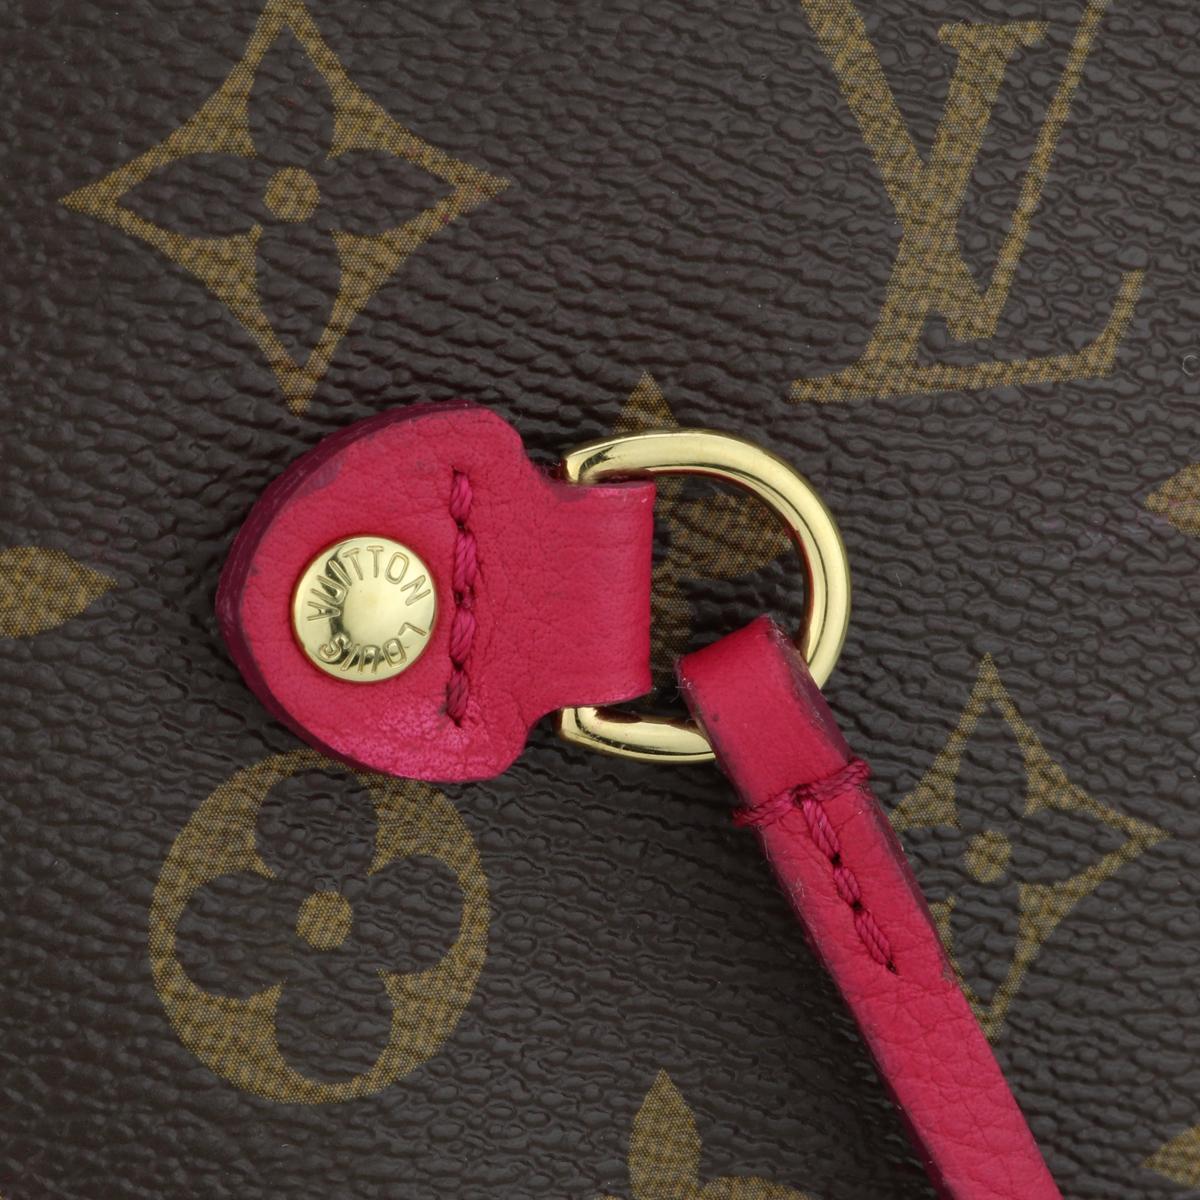 Louis Vuitton Neverfull MM Ikat Bag in Monogram Fuchsia 2013 Limited Edition For Sale 2